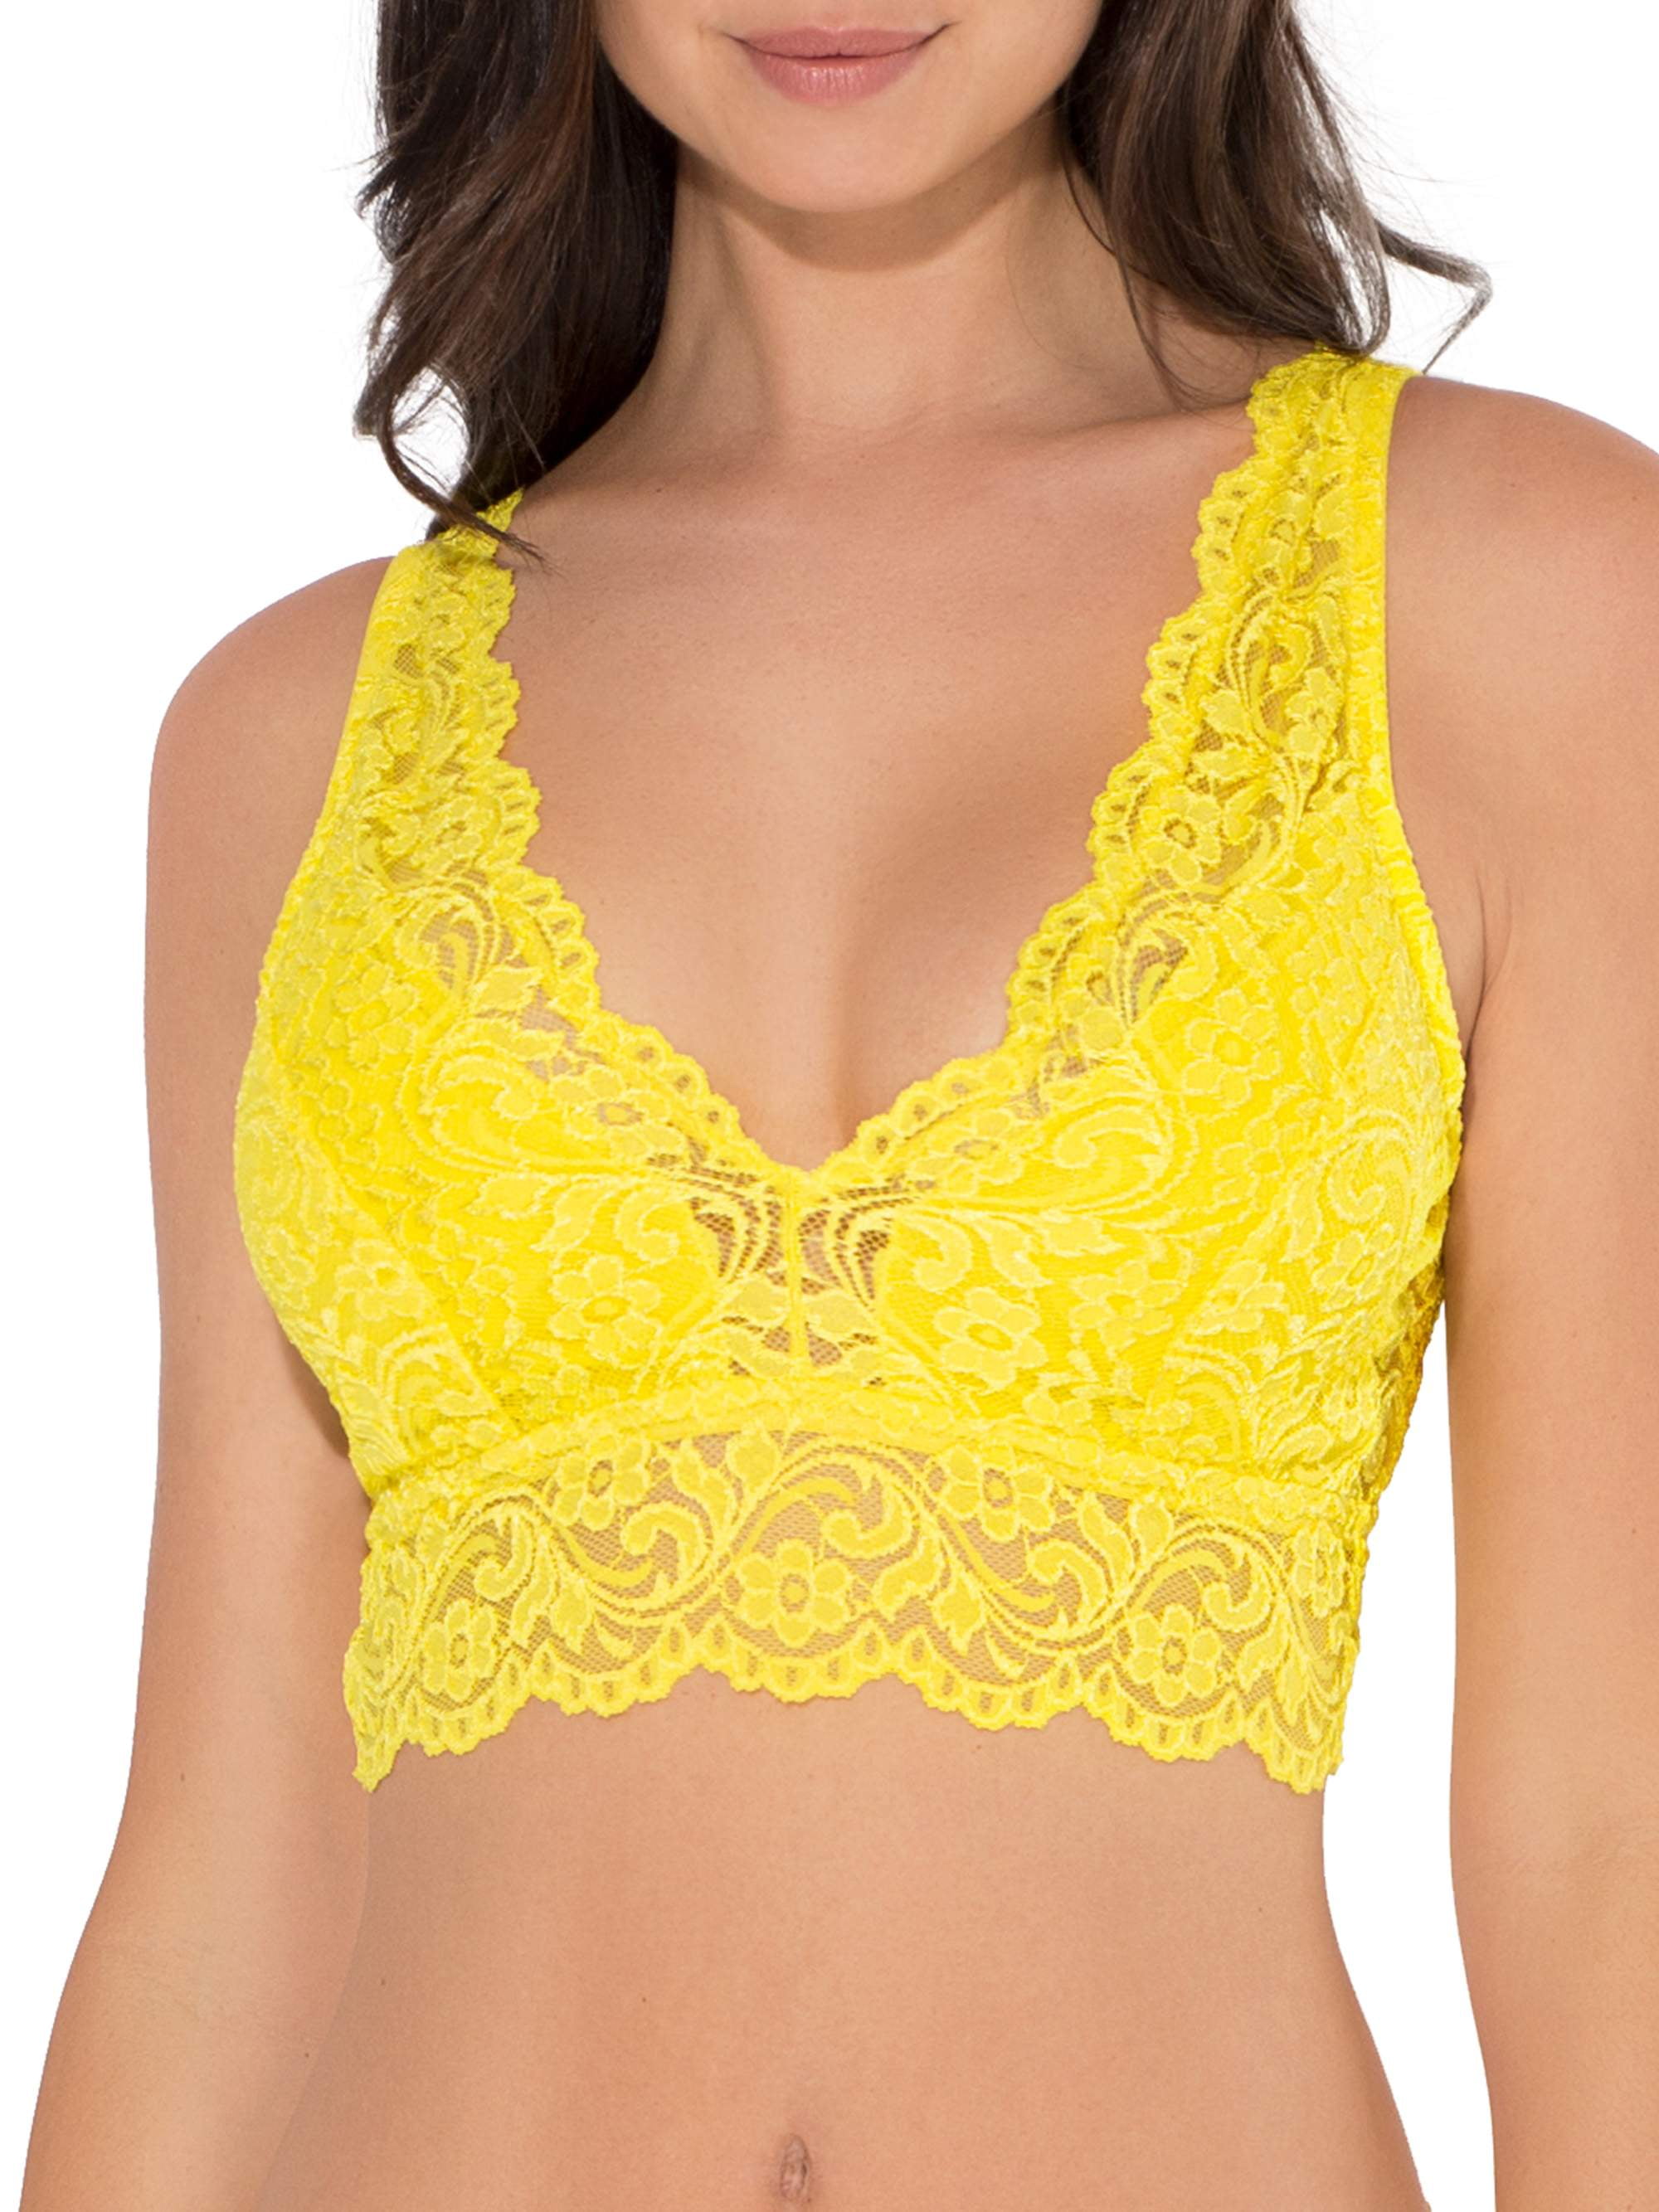 Only Hearts So Fine Sheer Lace Bralette by at Free People, Yellow Shade, L  - ShopStyle Bras